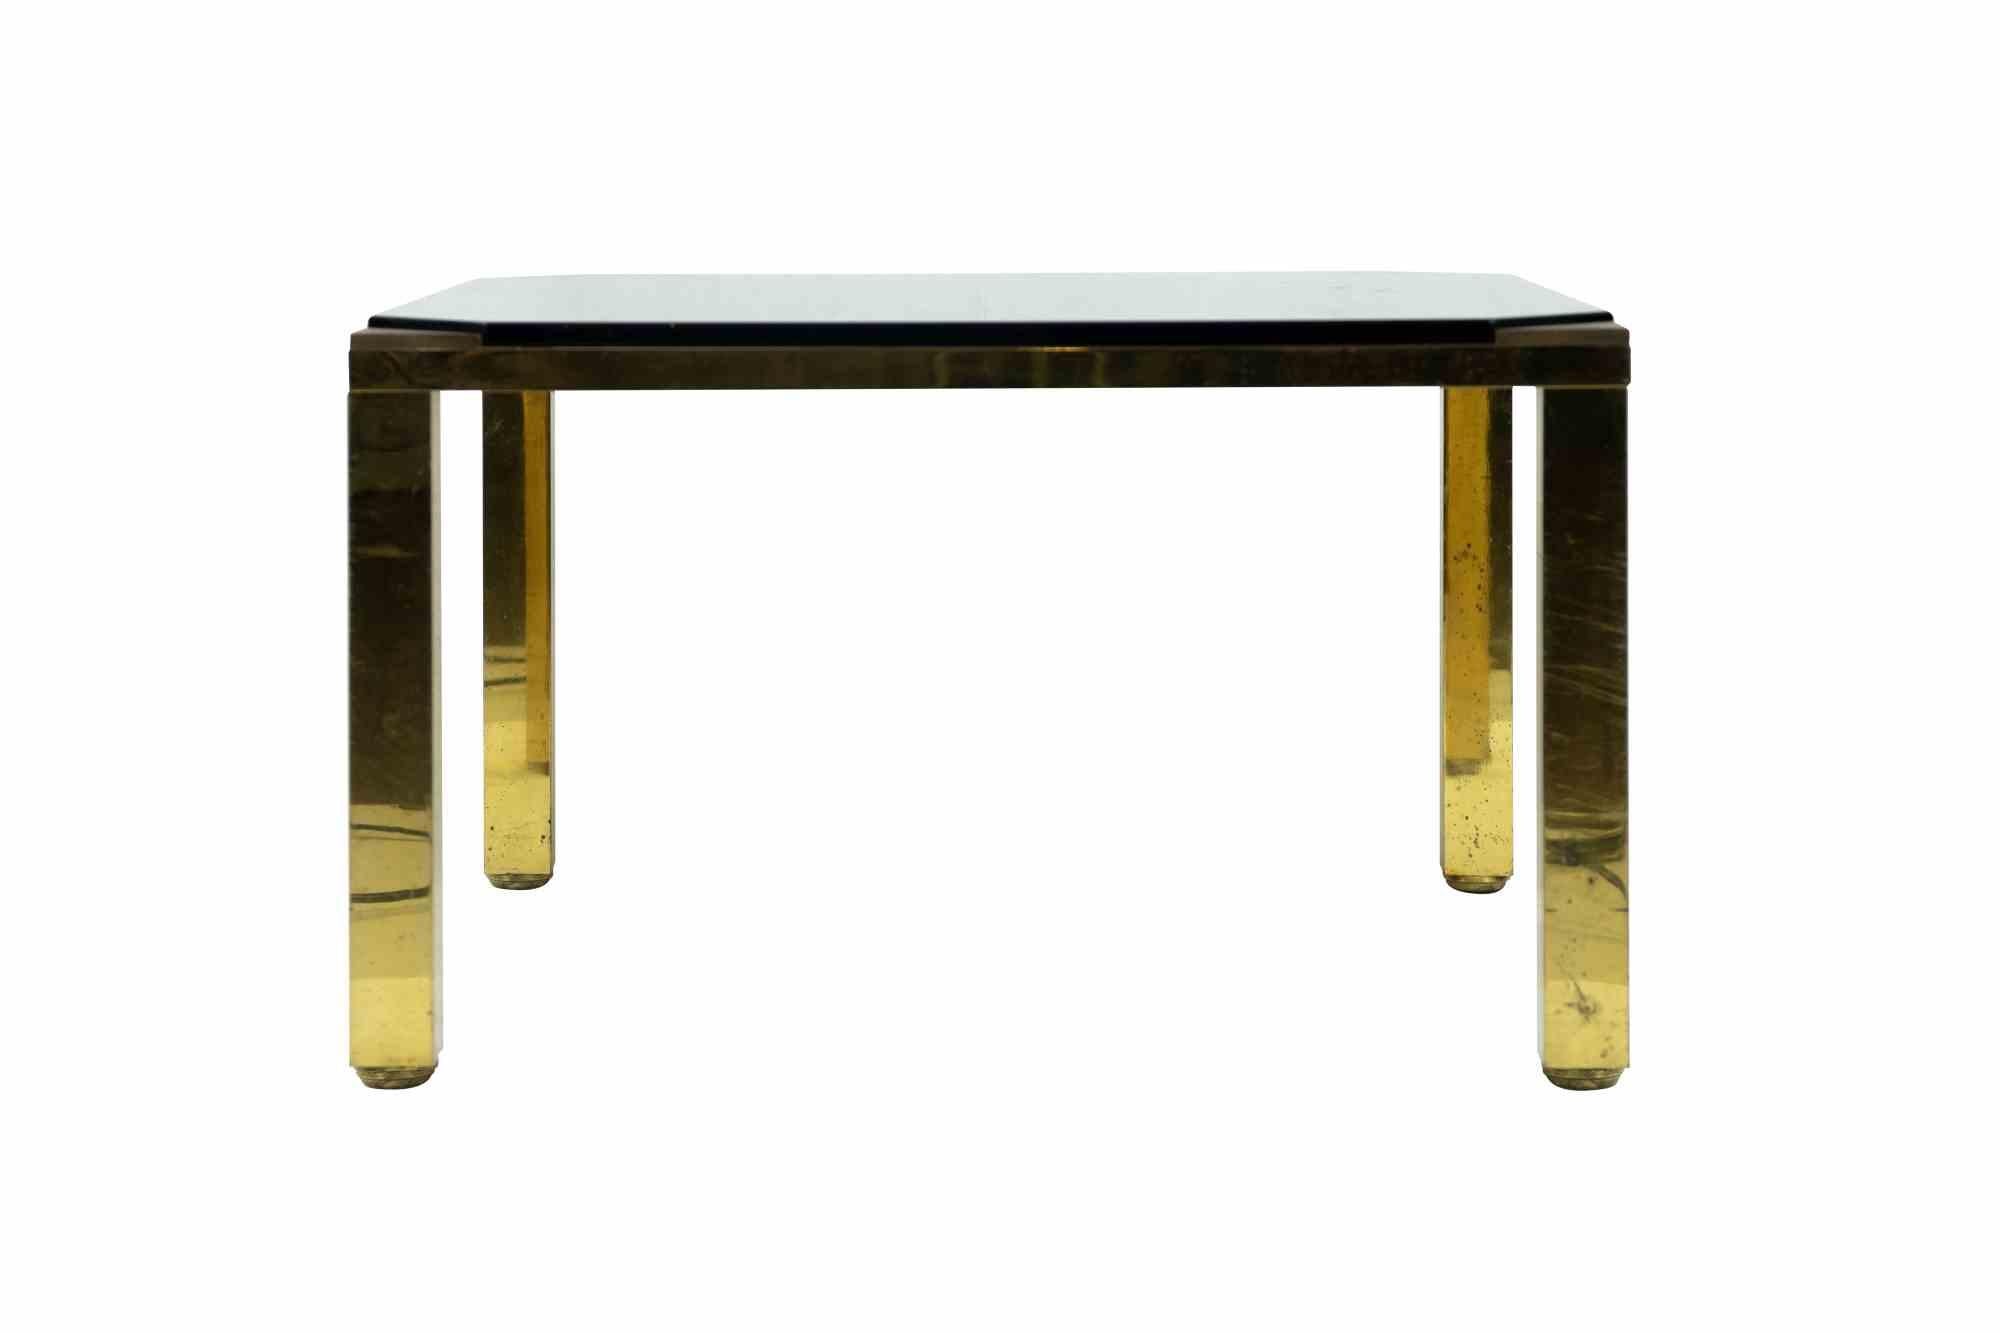 Brass Table is an original design furniture realized in the 1970s and attributed to Leonardo Falaschini.

A beautiful vintage table entirely realized in brass with glass top. 

Mint conditions except for some discoloring.